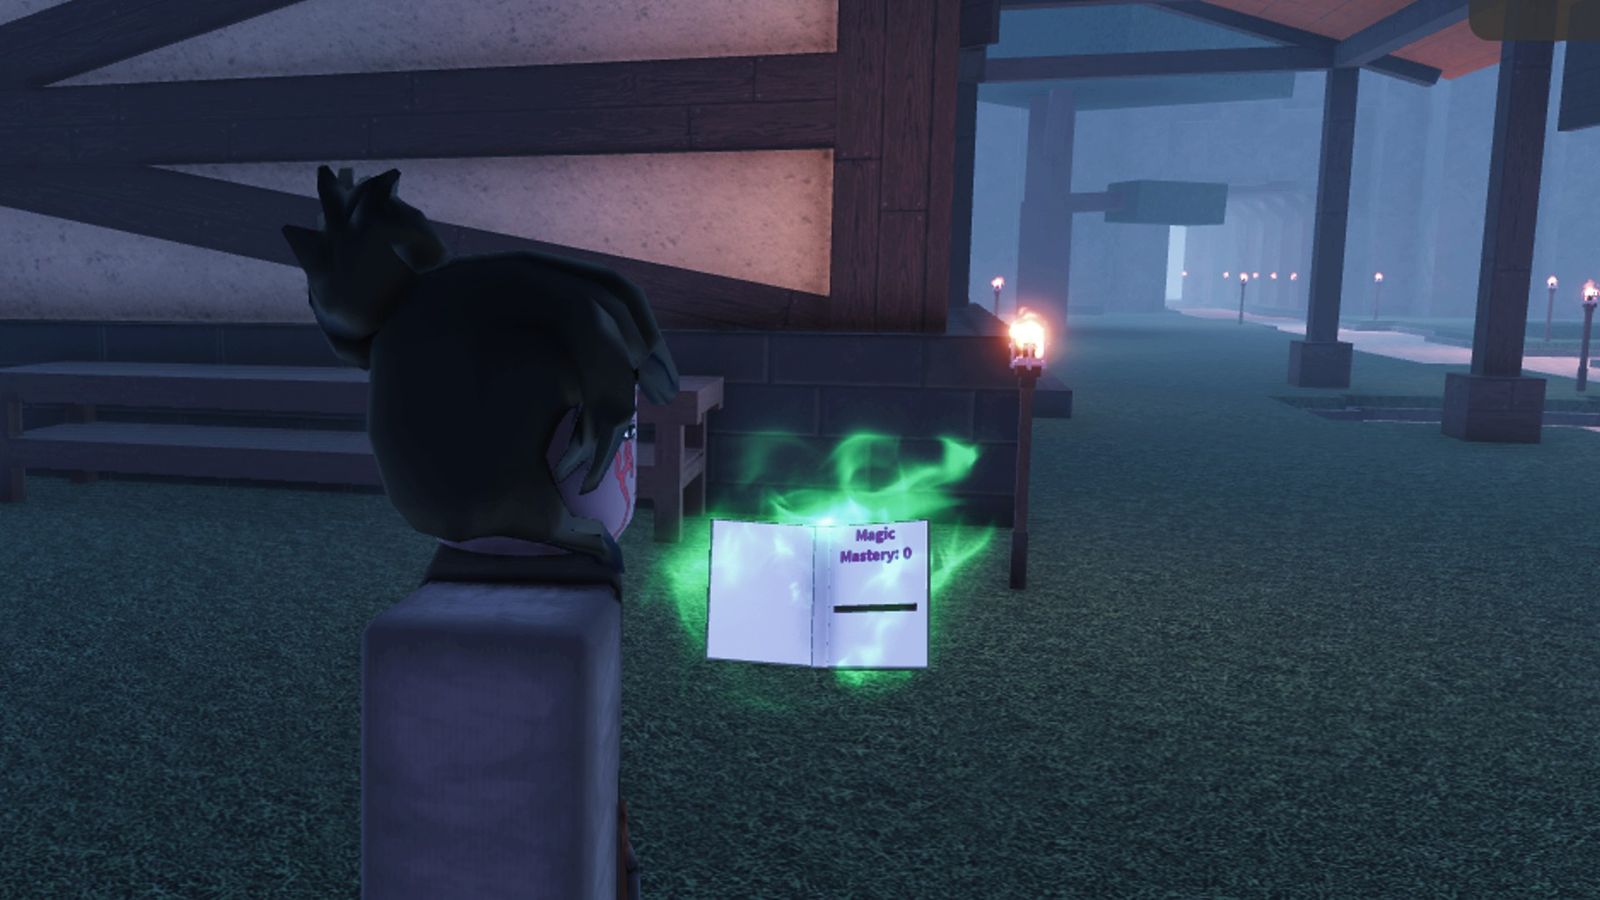 Roblox woman opens grimoire book that reads "Magic Mastery: 0"